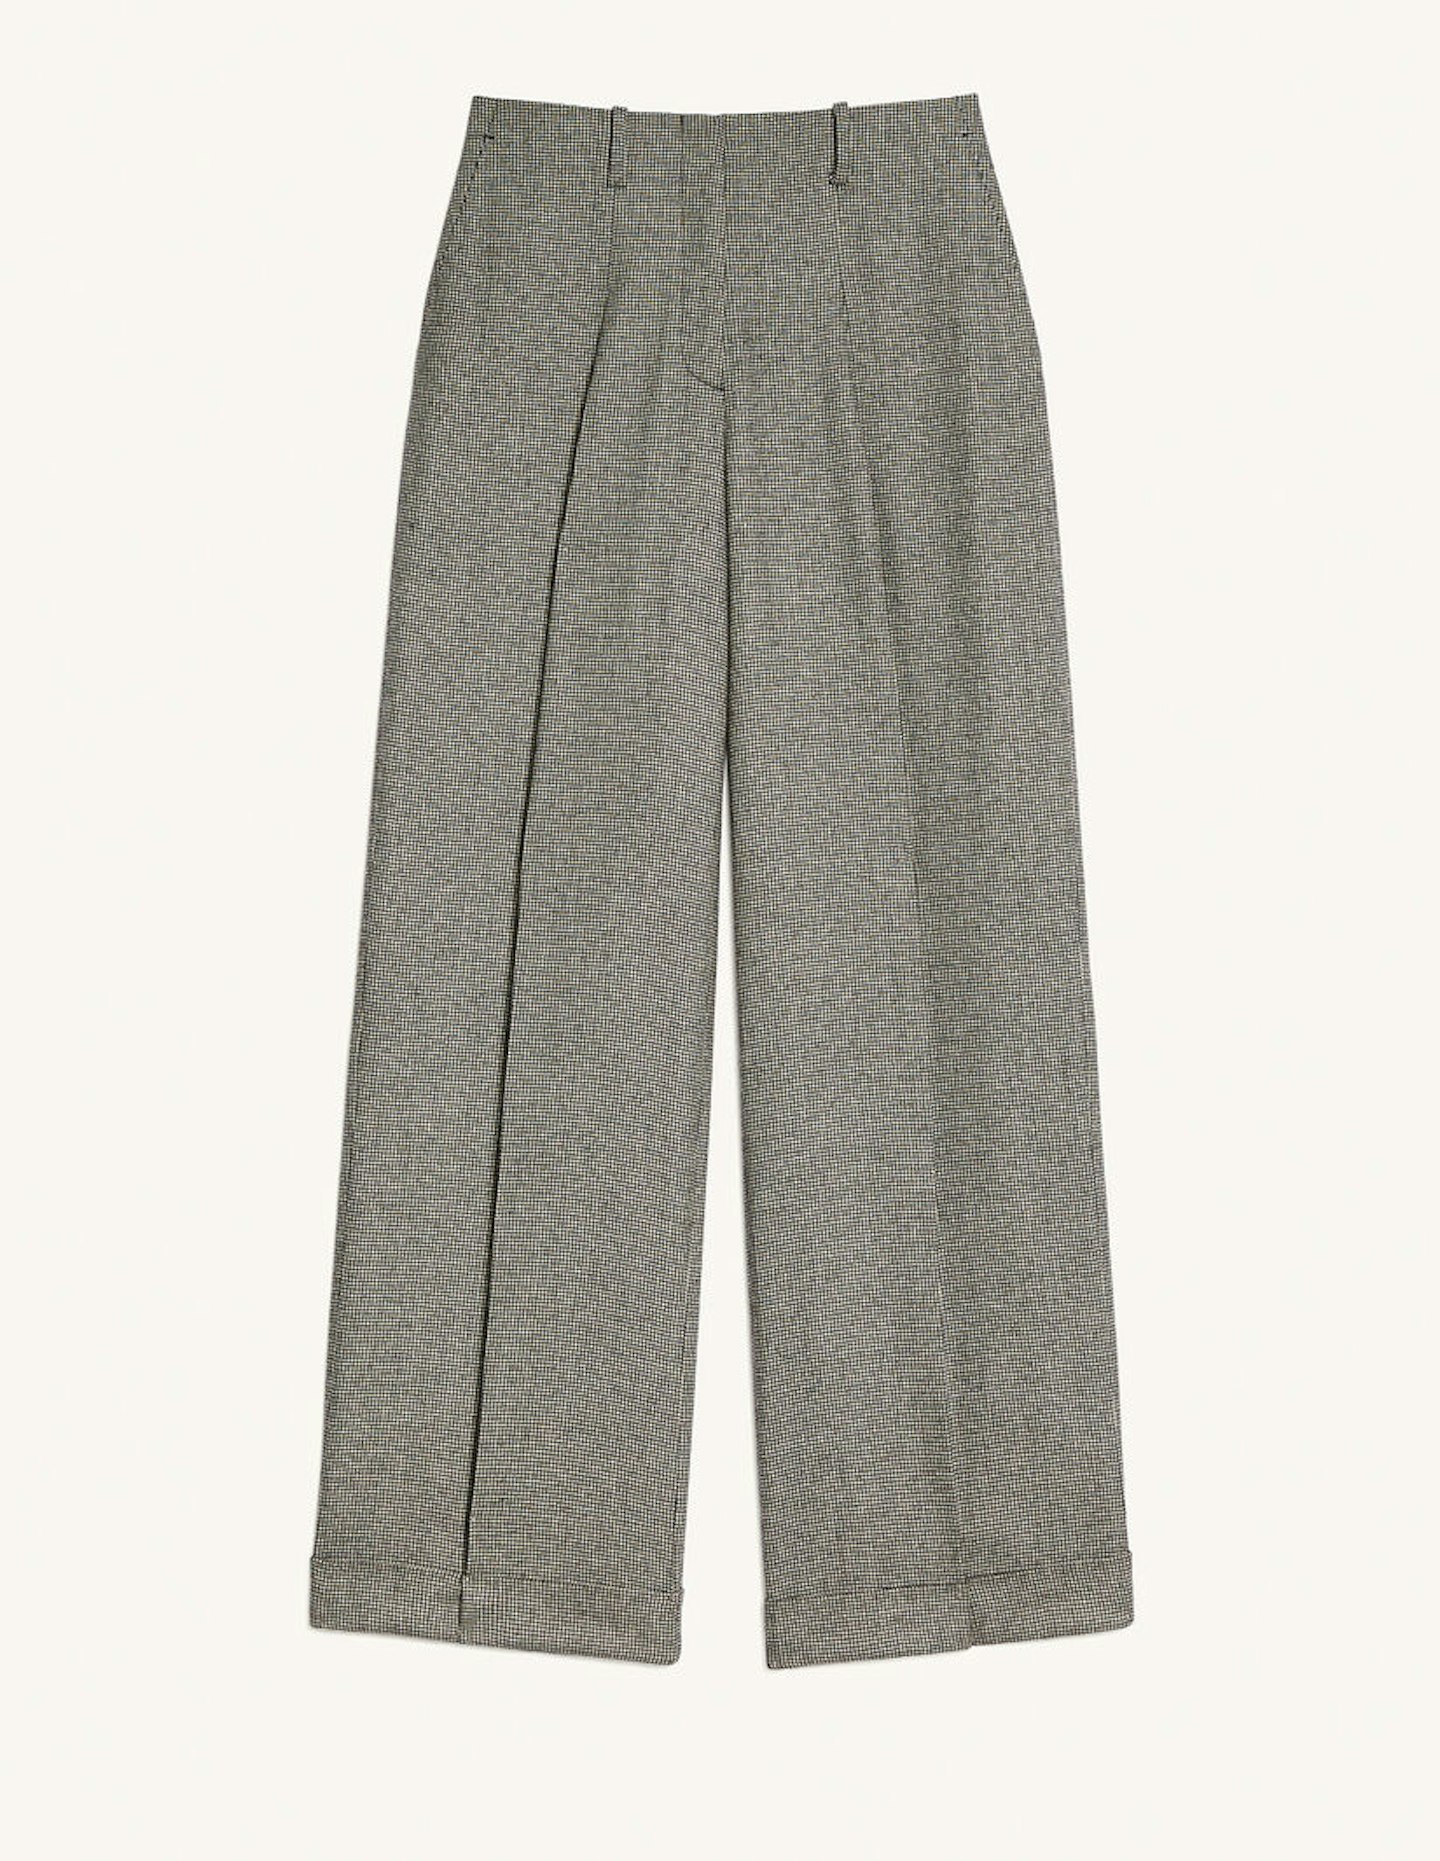 Sandro, High-Waisted Wide-Leg Trousers, £239